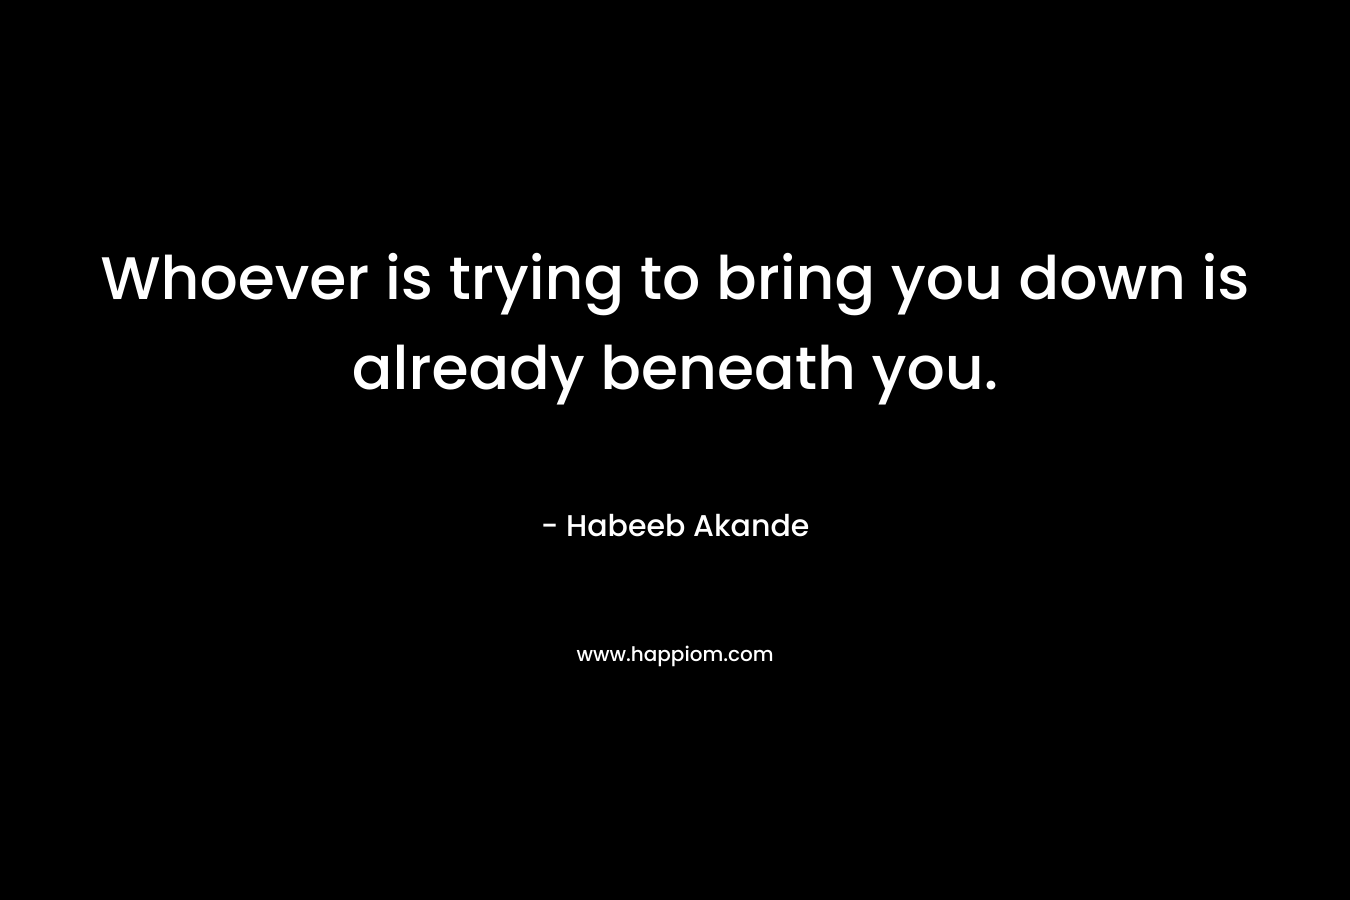 Whoever is trying to bring you down is already beneath you. – Habeeb Akande